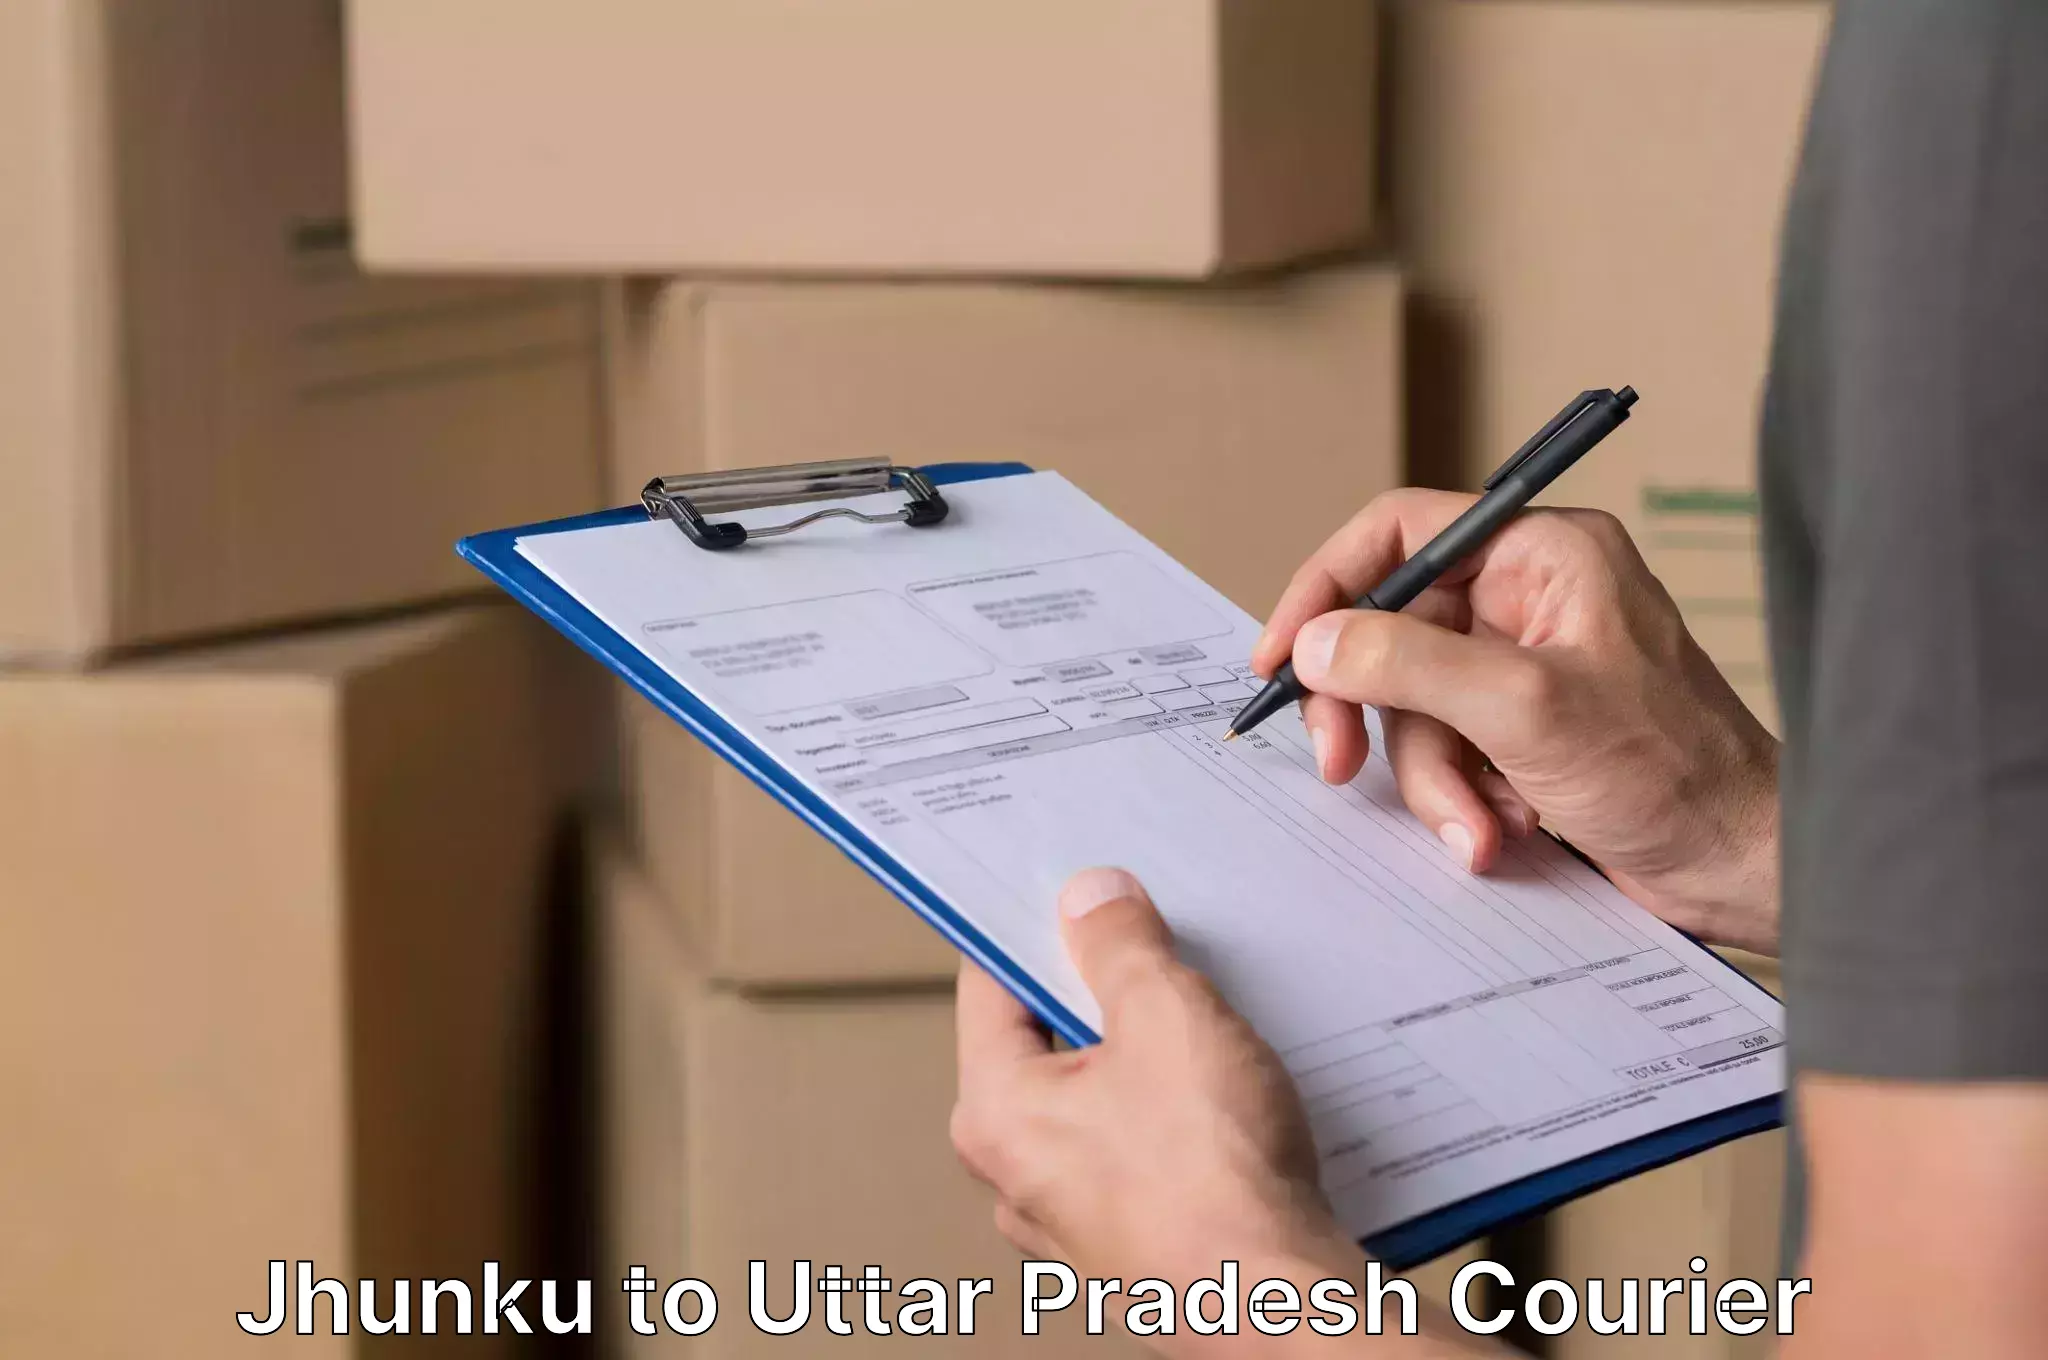 Hassle-free relocation Jhunku to Meerut